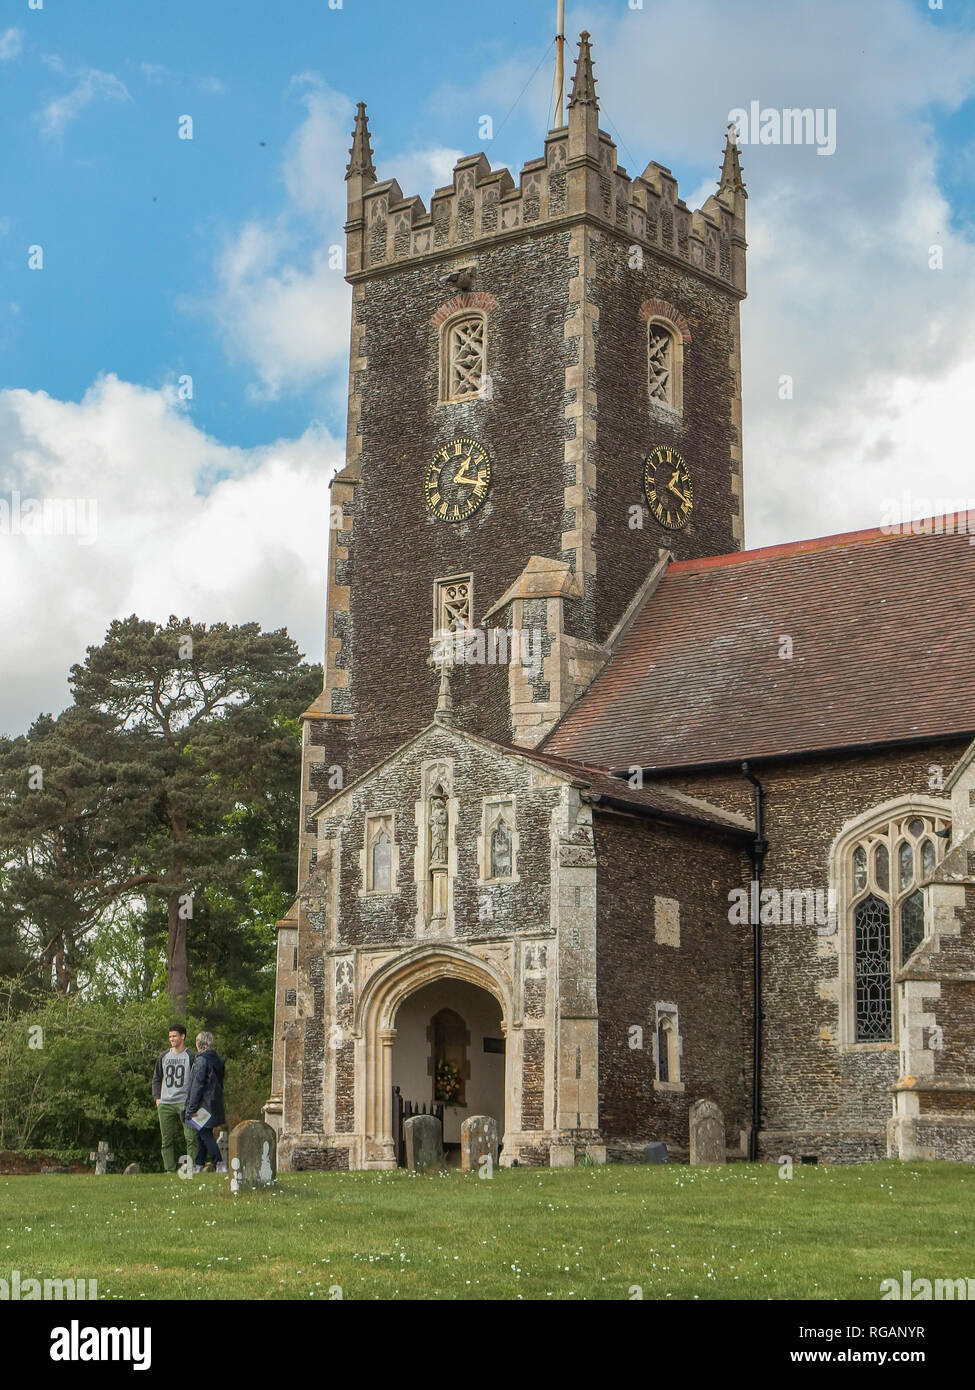 Sandringham, Norfolk, UK - April 26, 2014: View of Mary Magdalene church on the sandringham estate in Nolfolk.  Shot shows tower and clock with people. Stock Photo